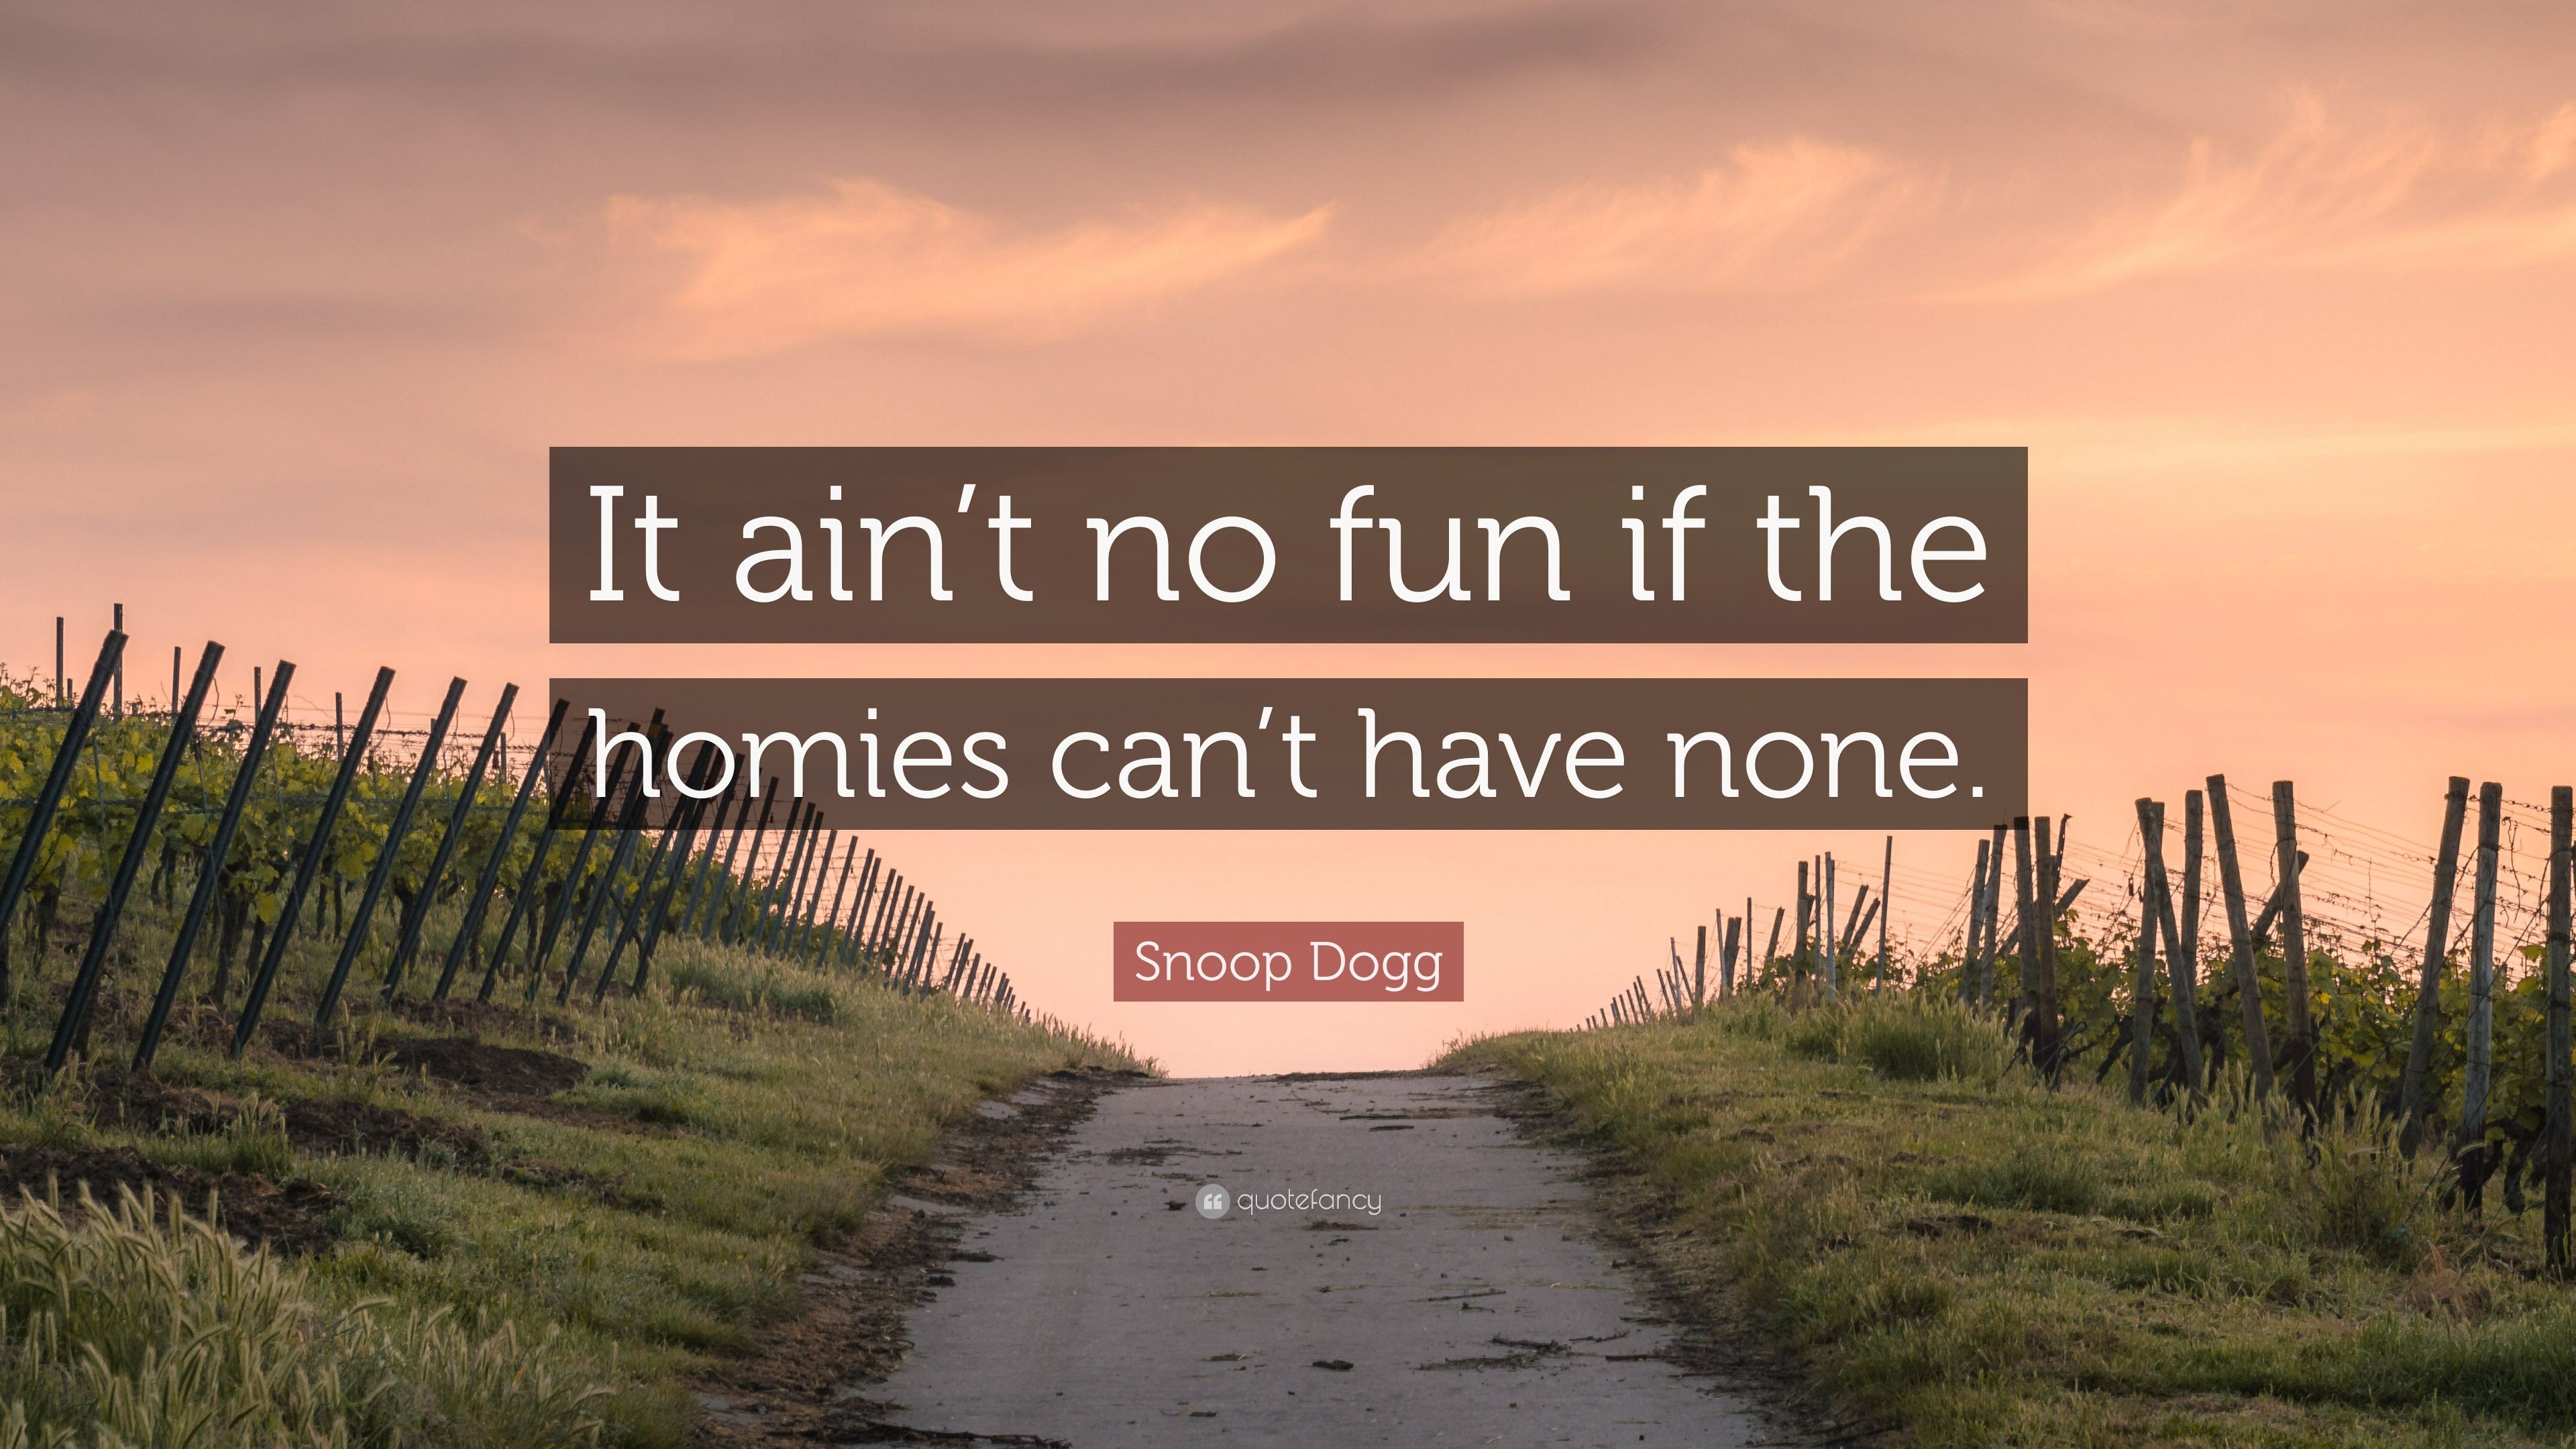 Snoop Dogg Quote It aint no fun if the homies can